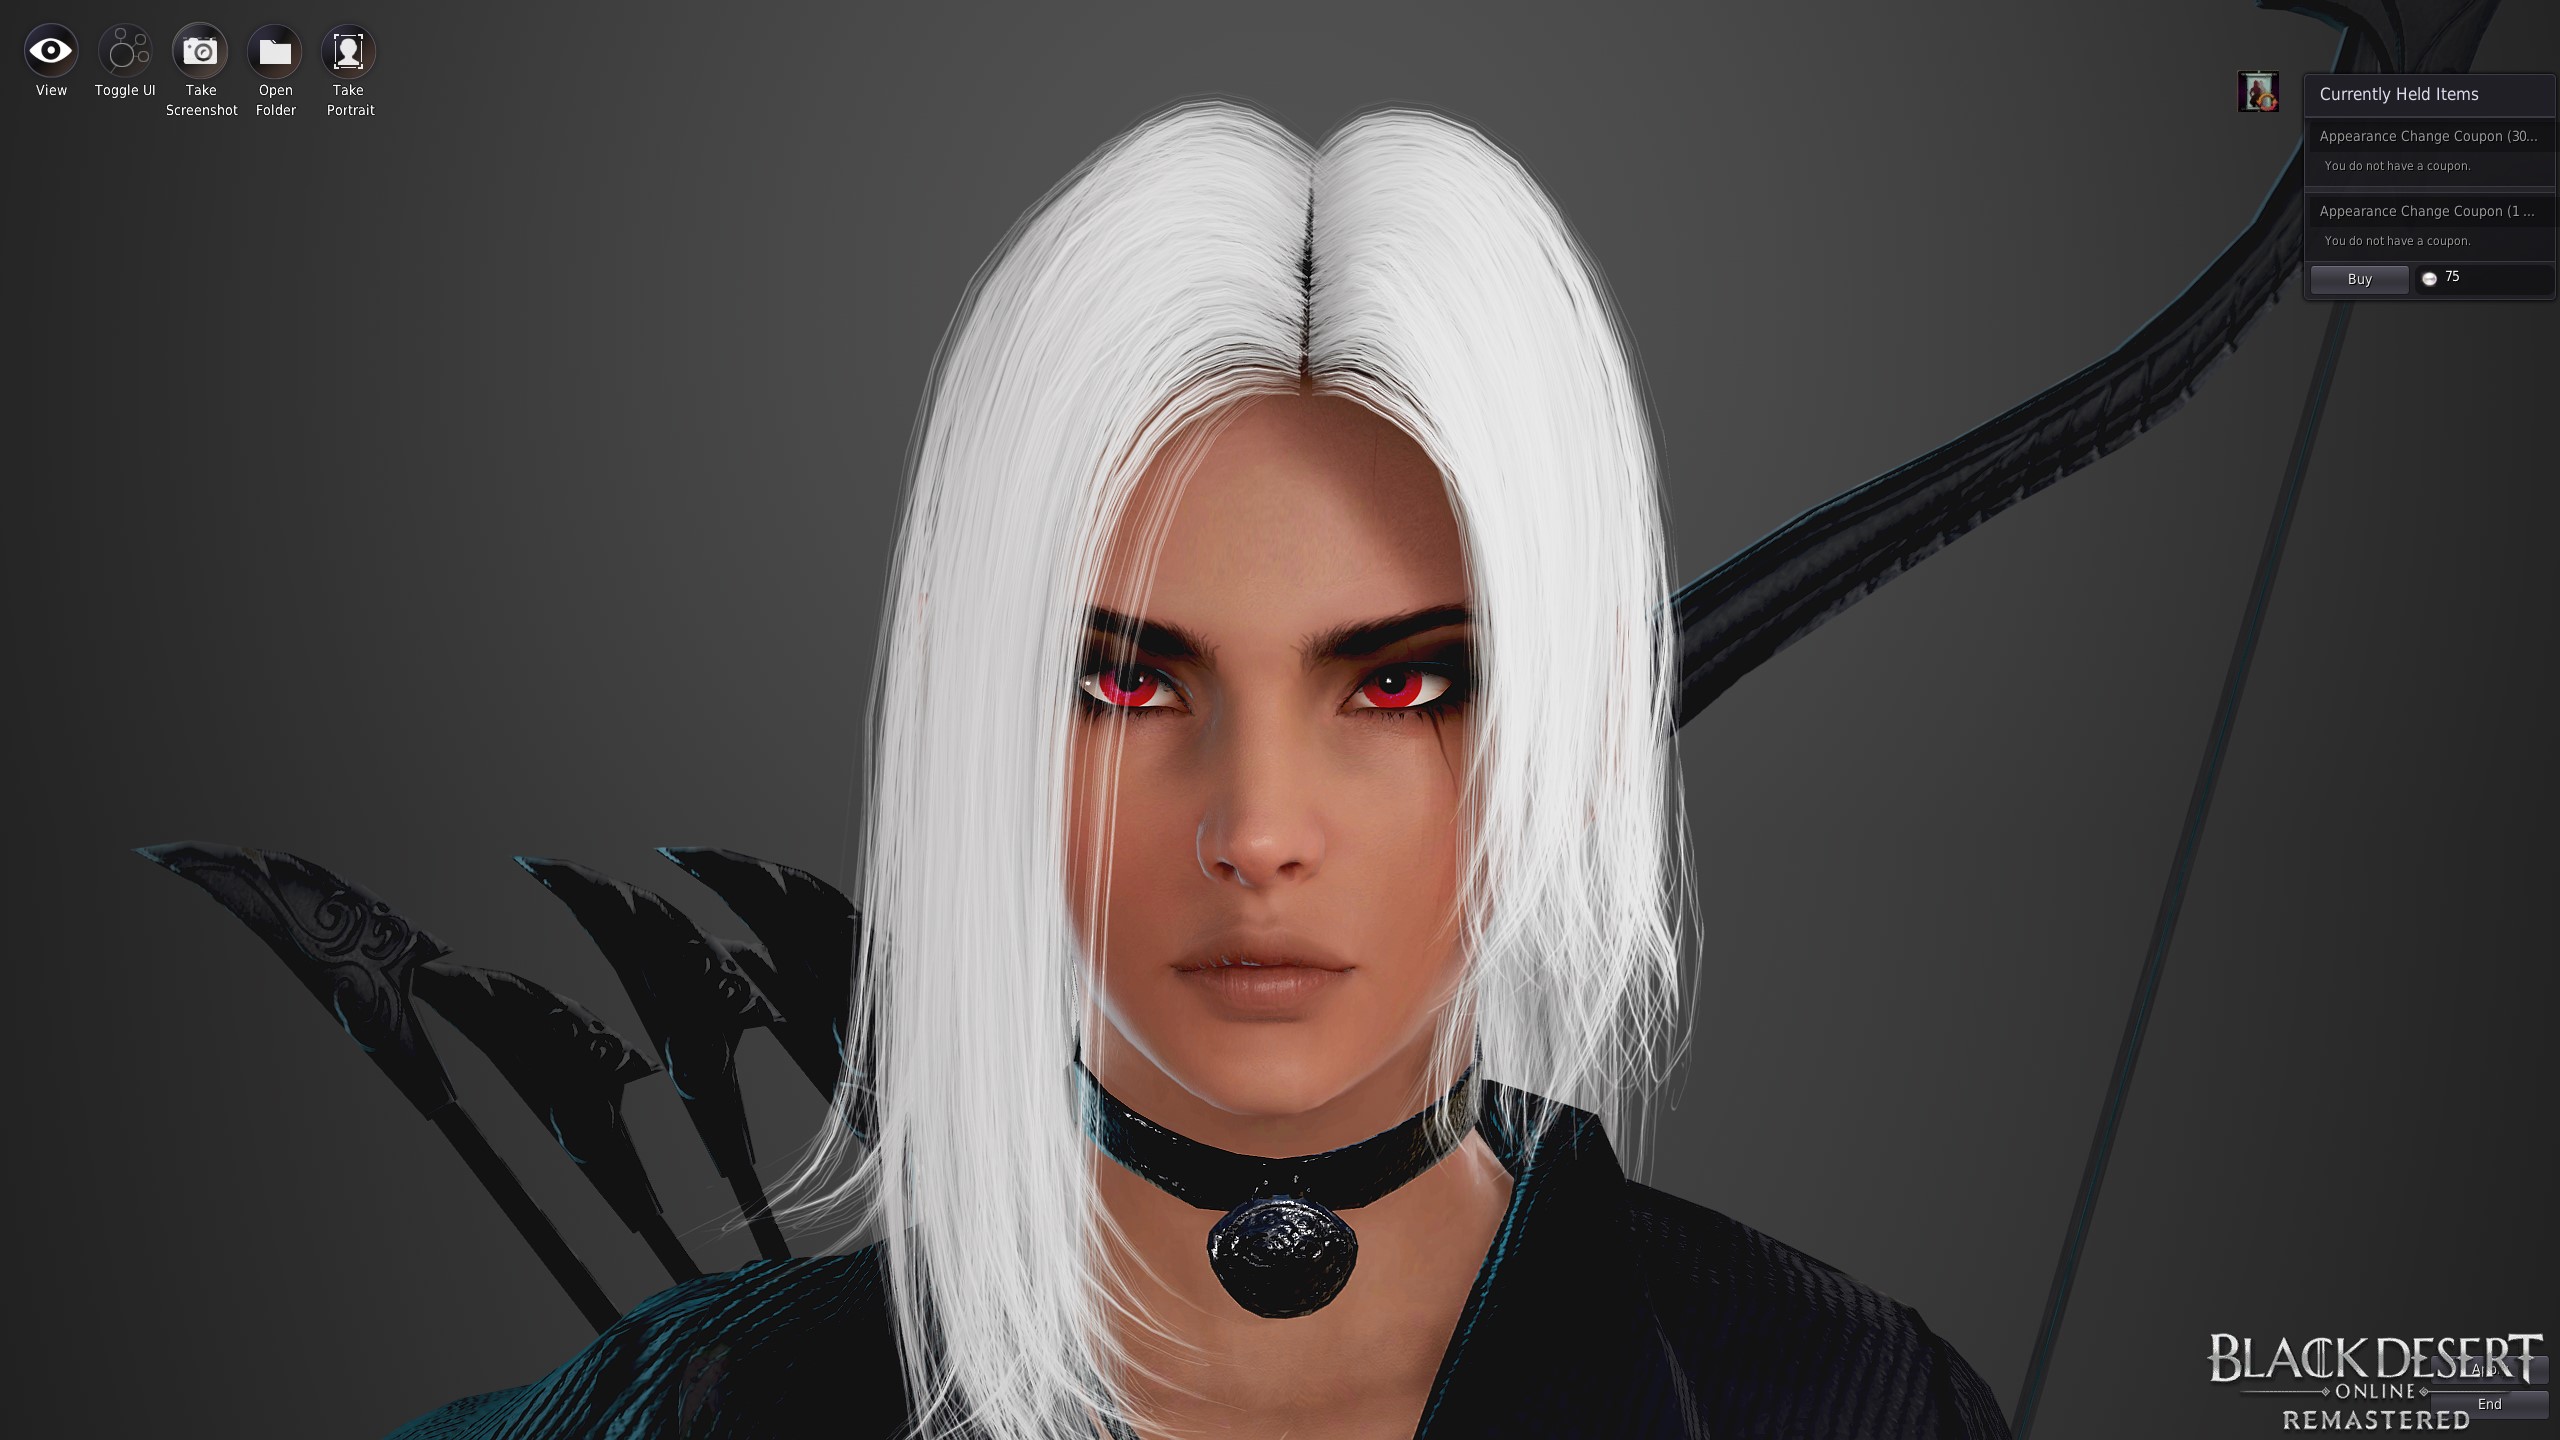 black desert online character creation tool download page